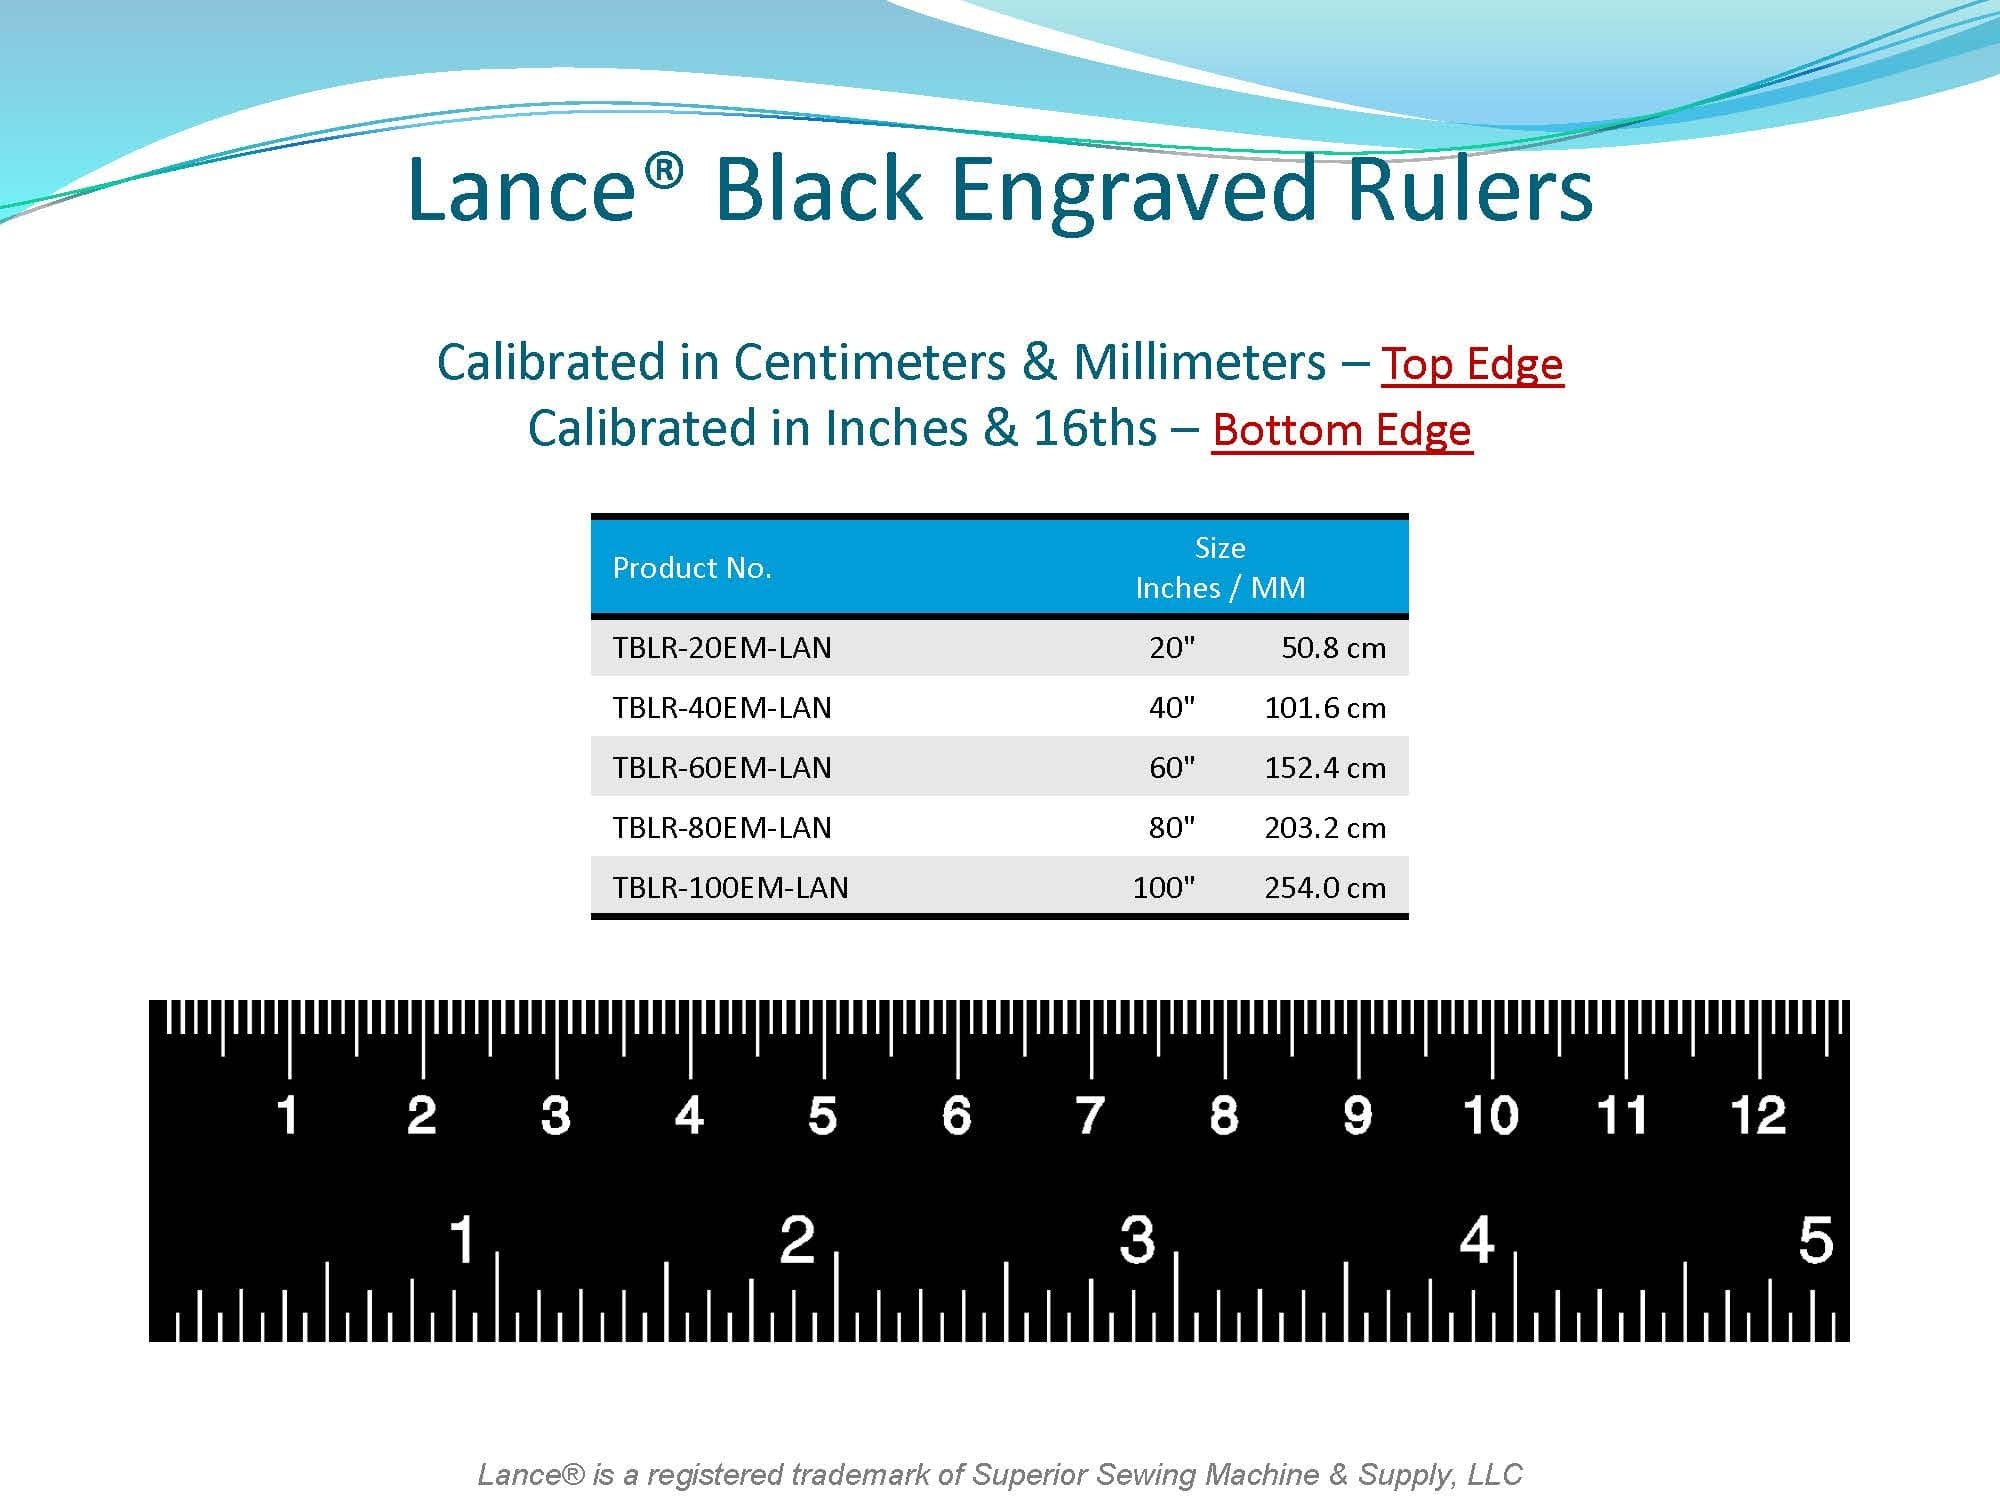 LANCE BLACK ENGRAVED RULER
CALIBRATED in cm or mm - TOP EDGE
CALIBRATED in INCHES or 16ths - BOTTOM  EDGE